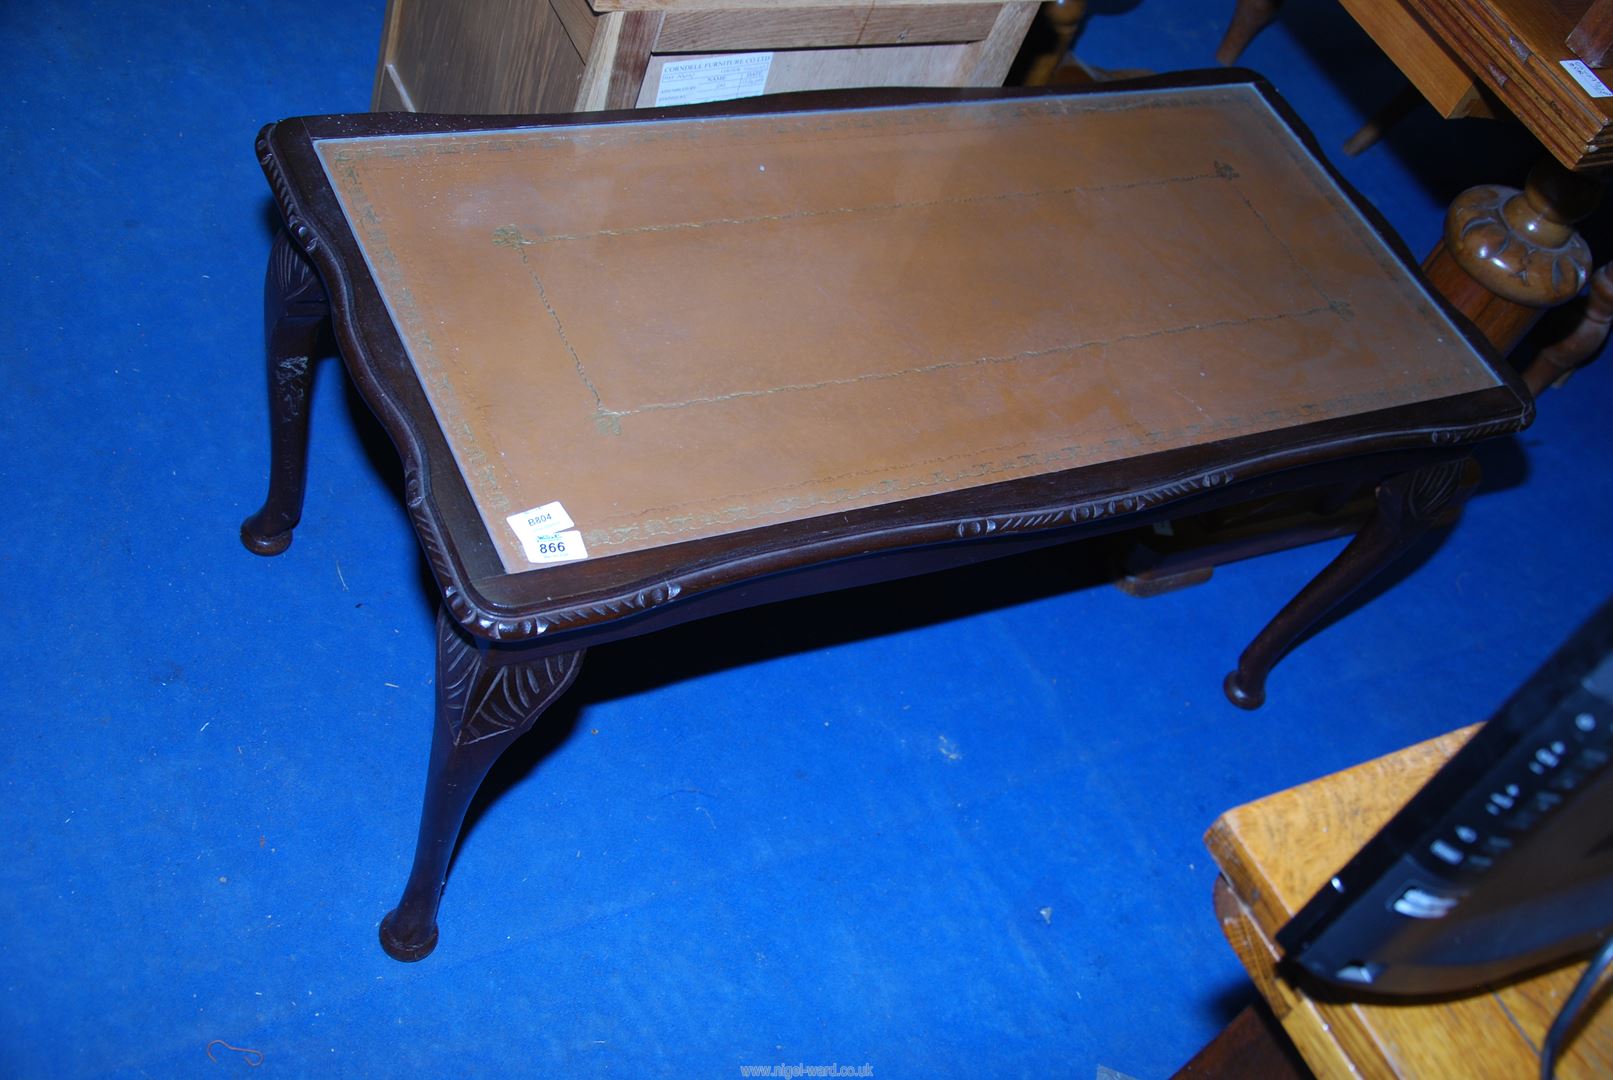 A Mahogany framed leather glass topped coffee table.